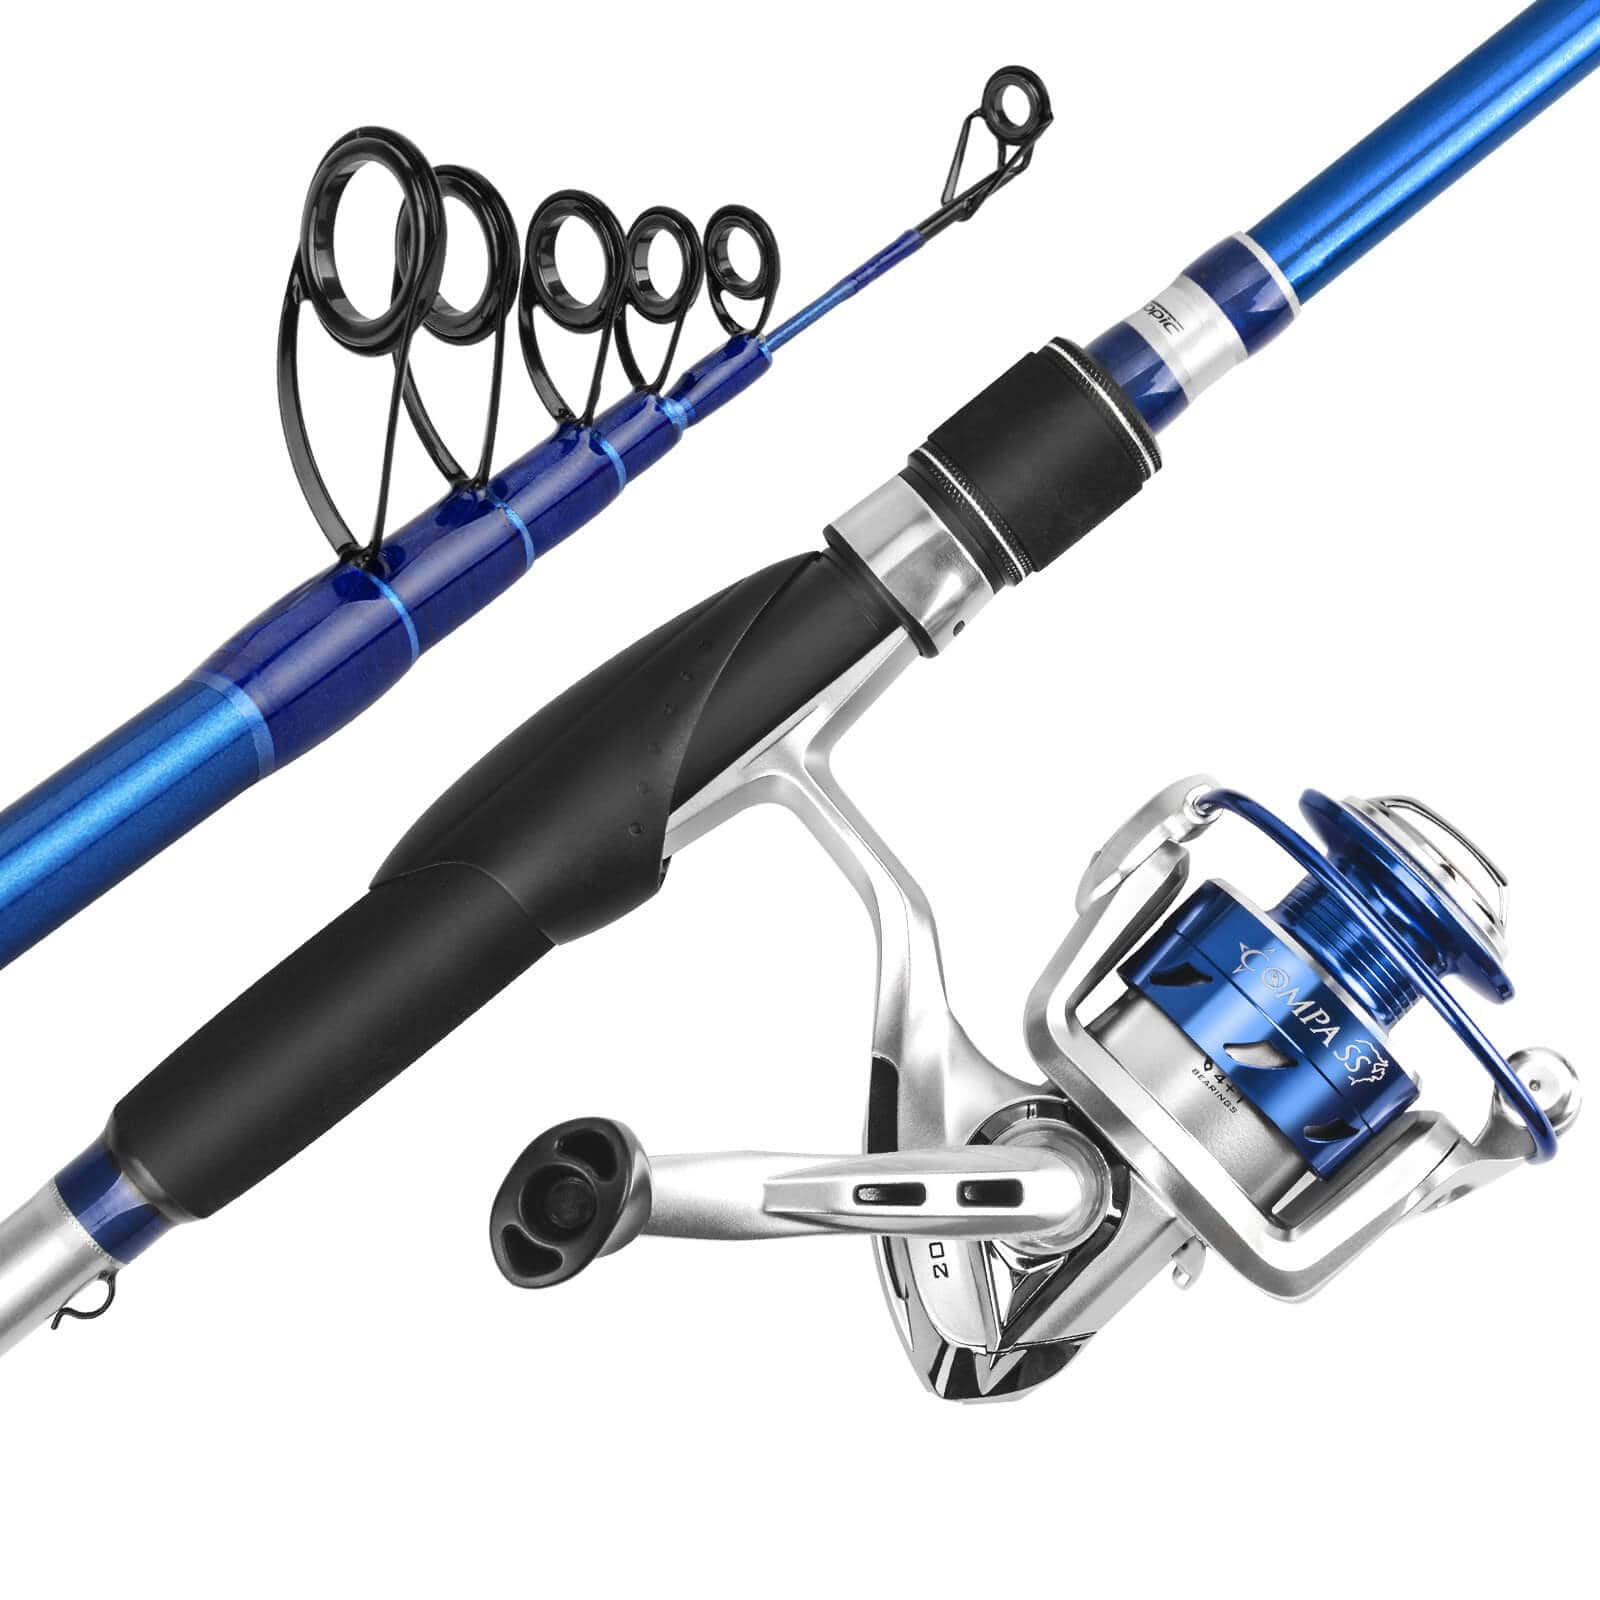 Upgrade Your Fishing Gear with Our Reel and Rod Combos - KastKing